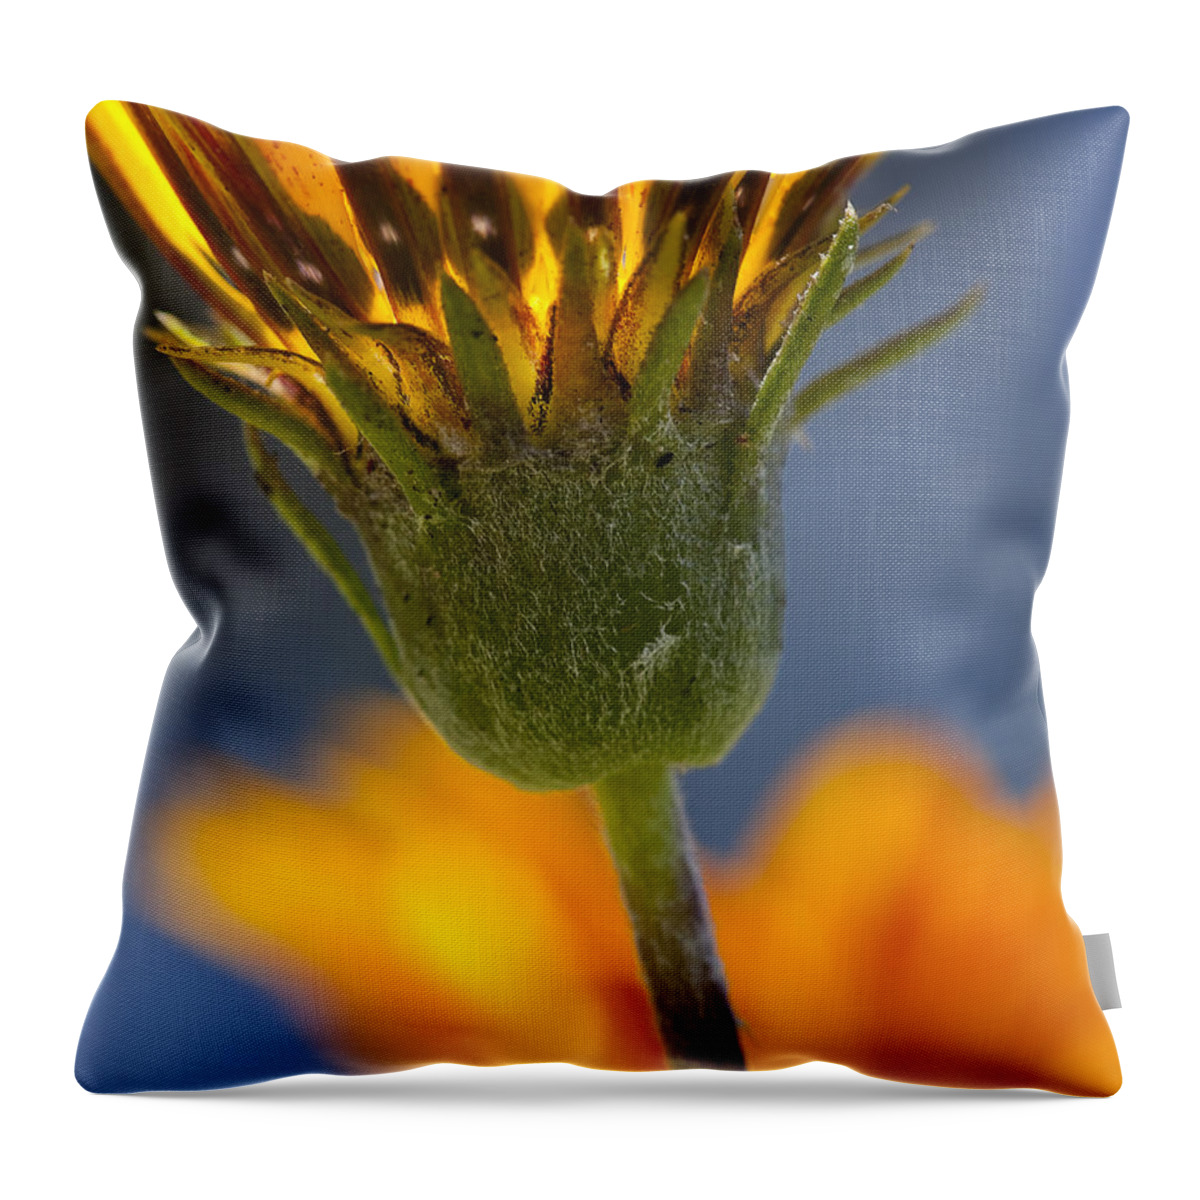 Flowers Throw Pillow featuring the photograph Gerbera Daisy by Kelley King